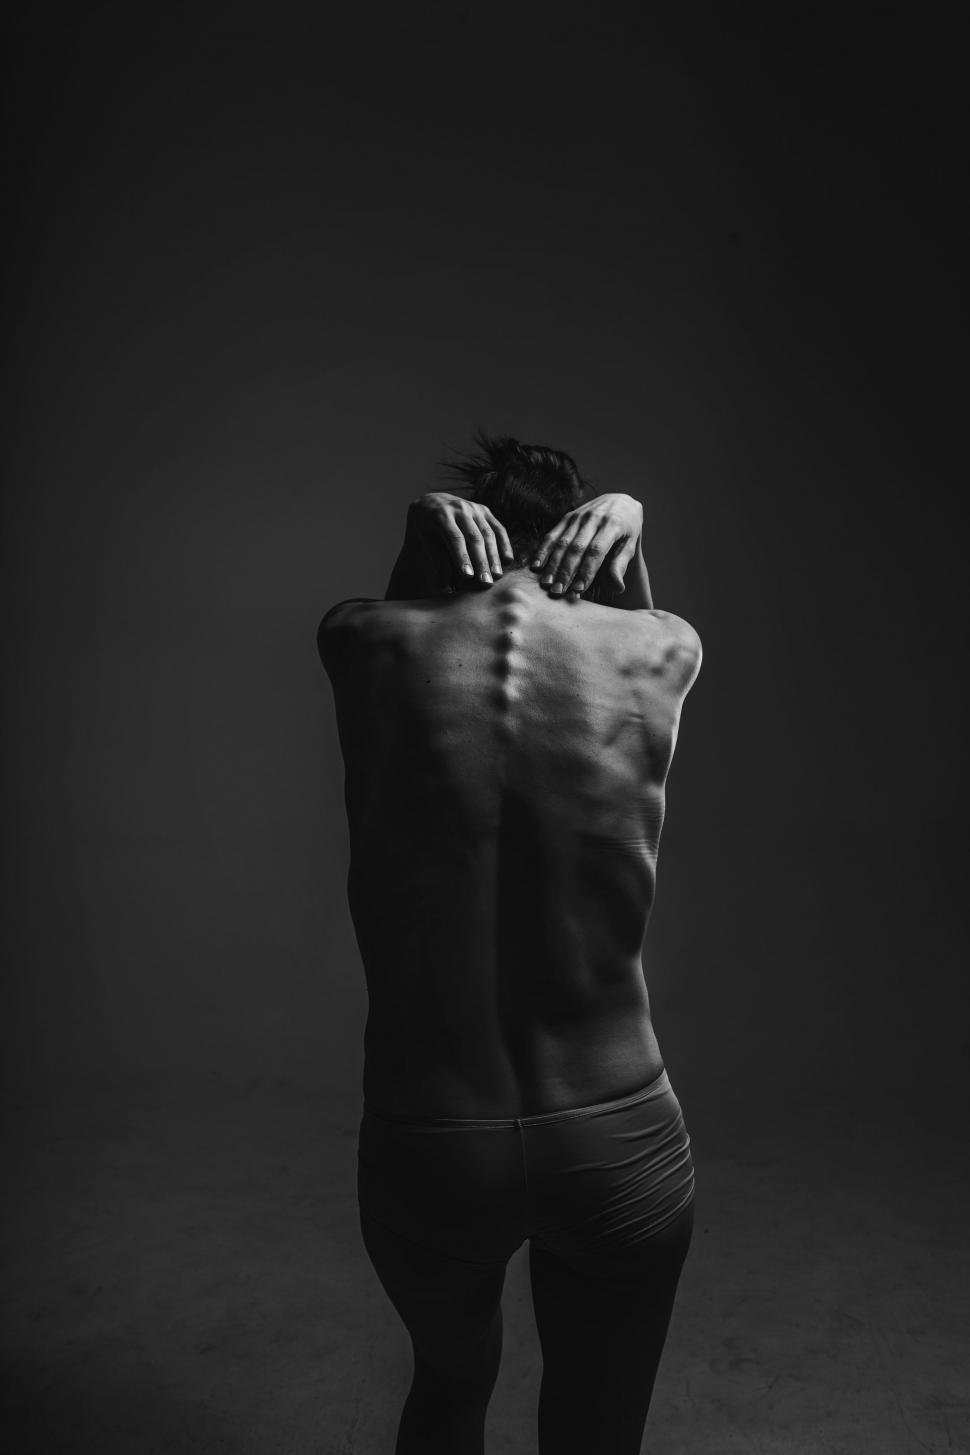 Free Image of Naked Man Standing in Black and White 